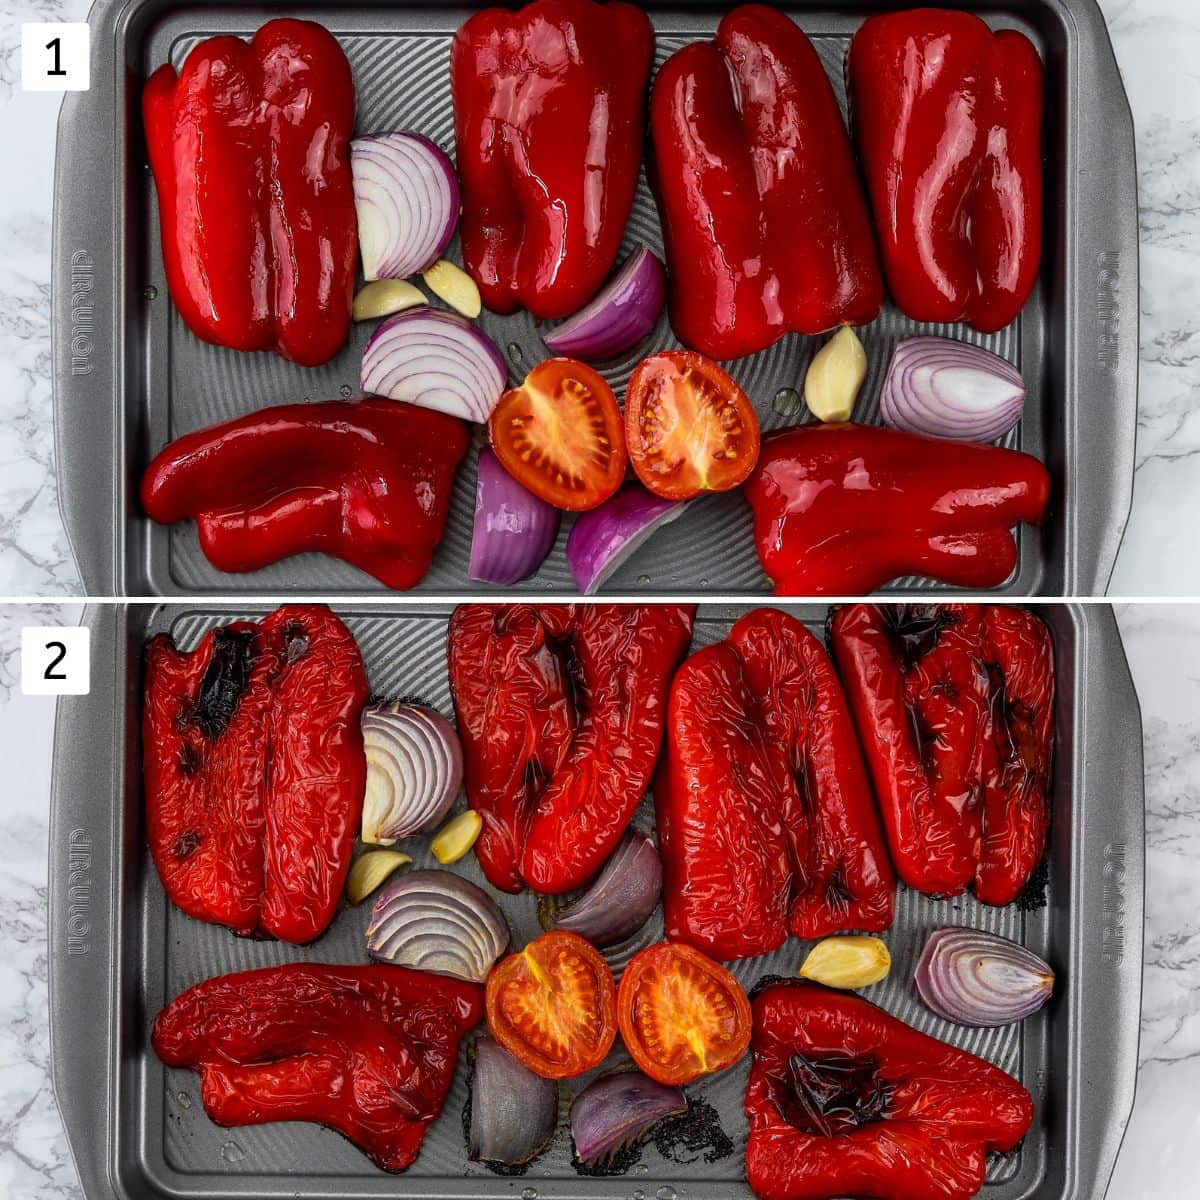 Collage of 2 images showing veggies in a baking tray and roasted in oven.